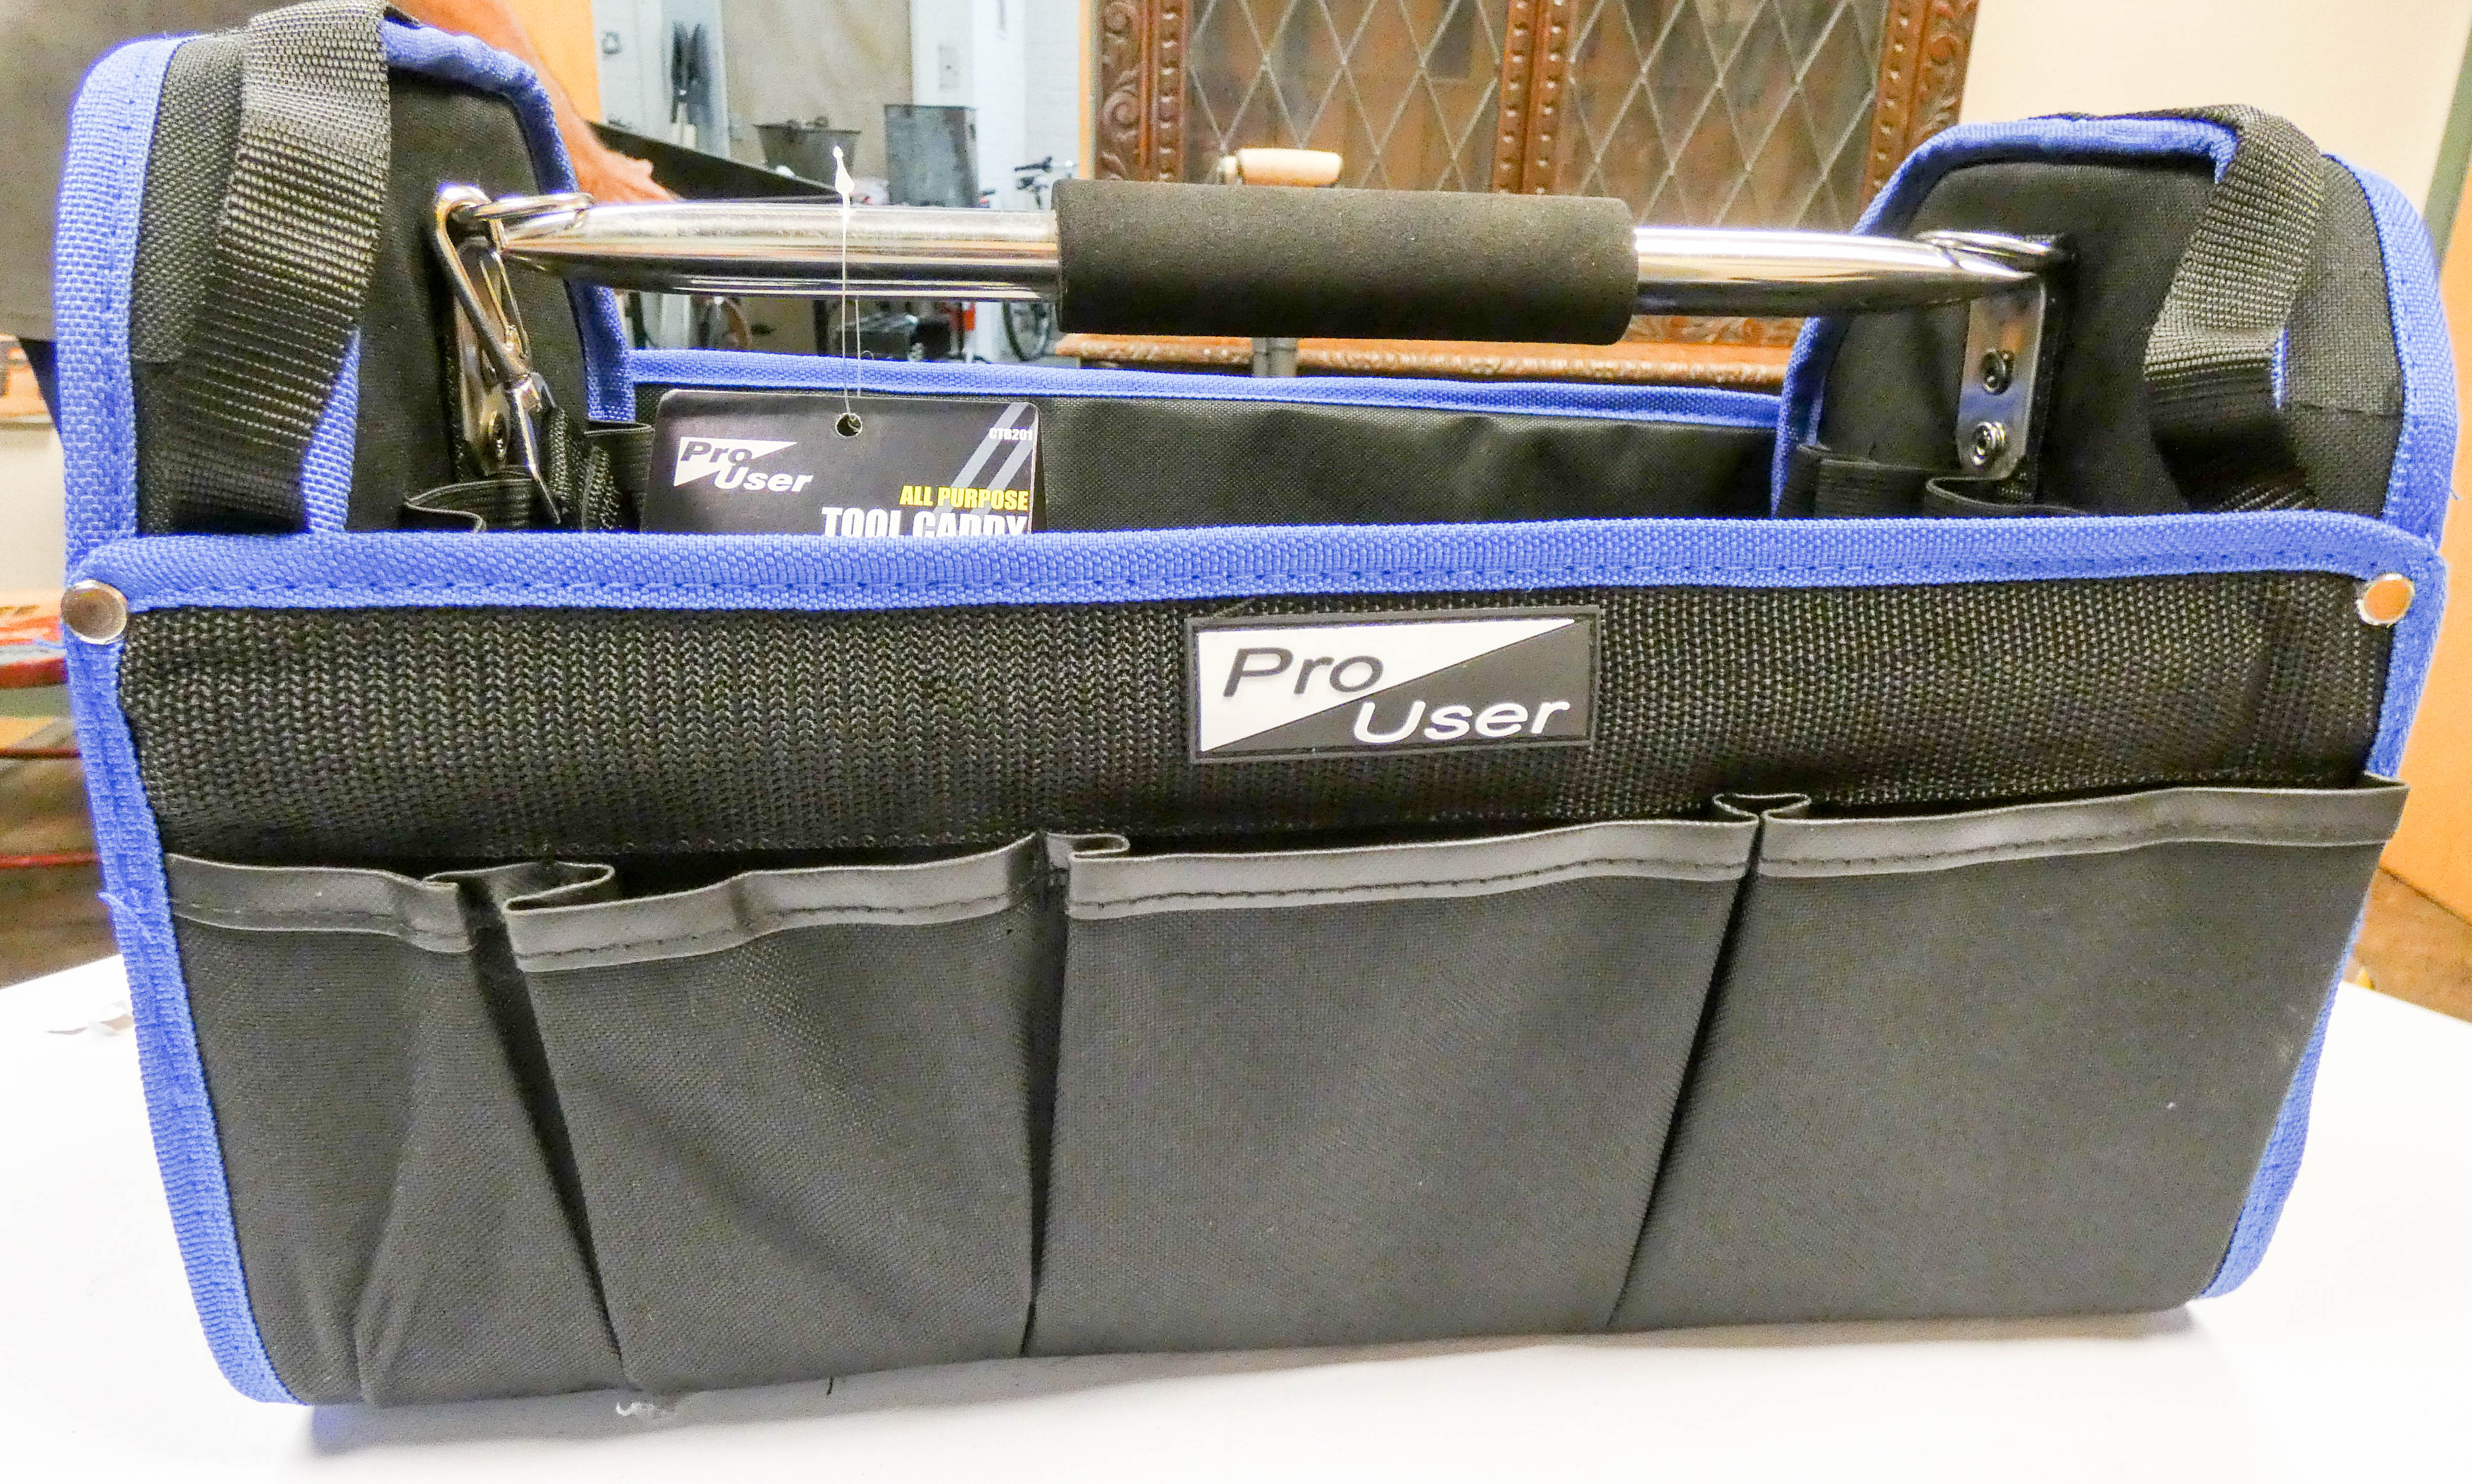 A new all purpose 40cm tool caddy